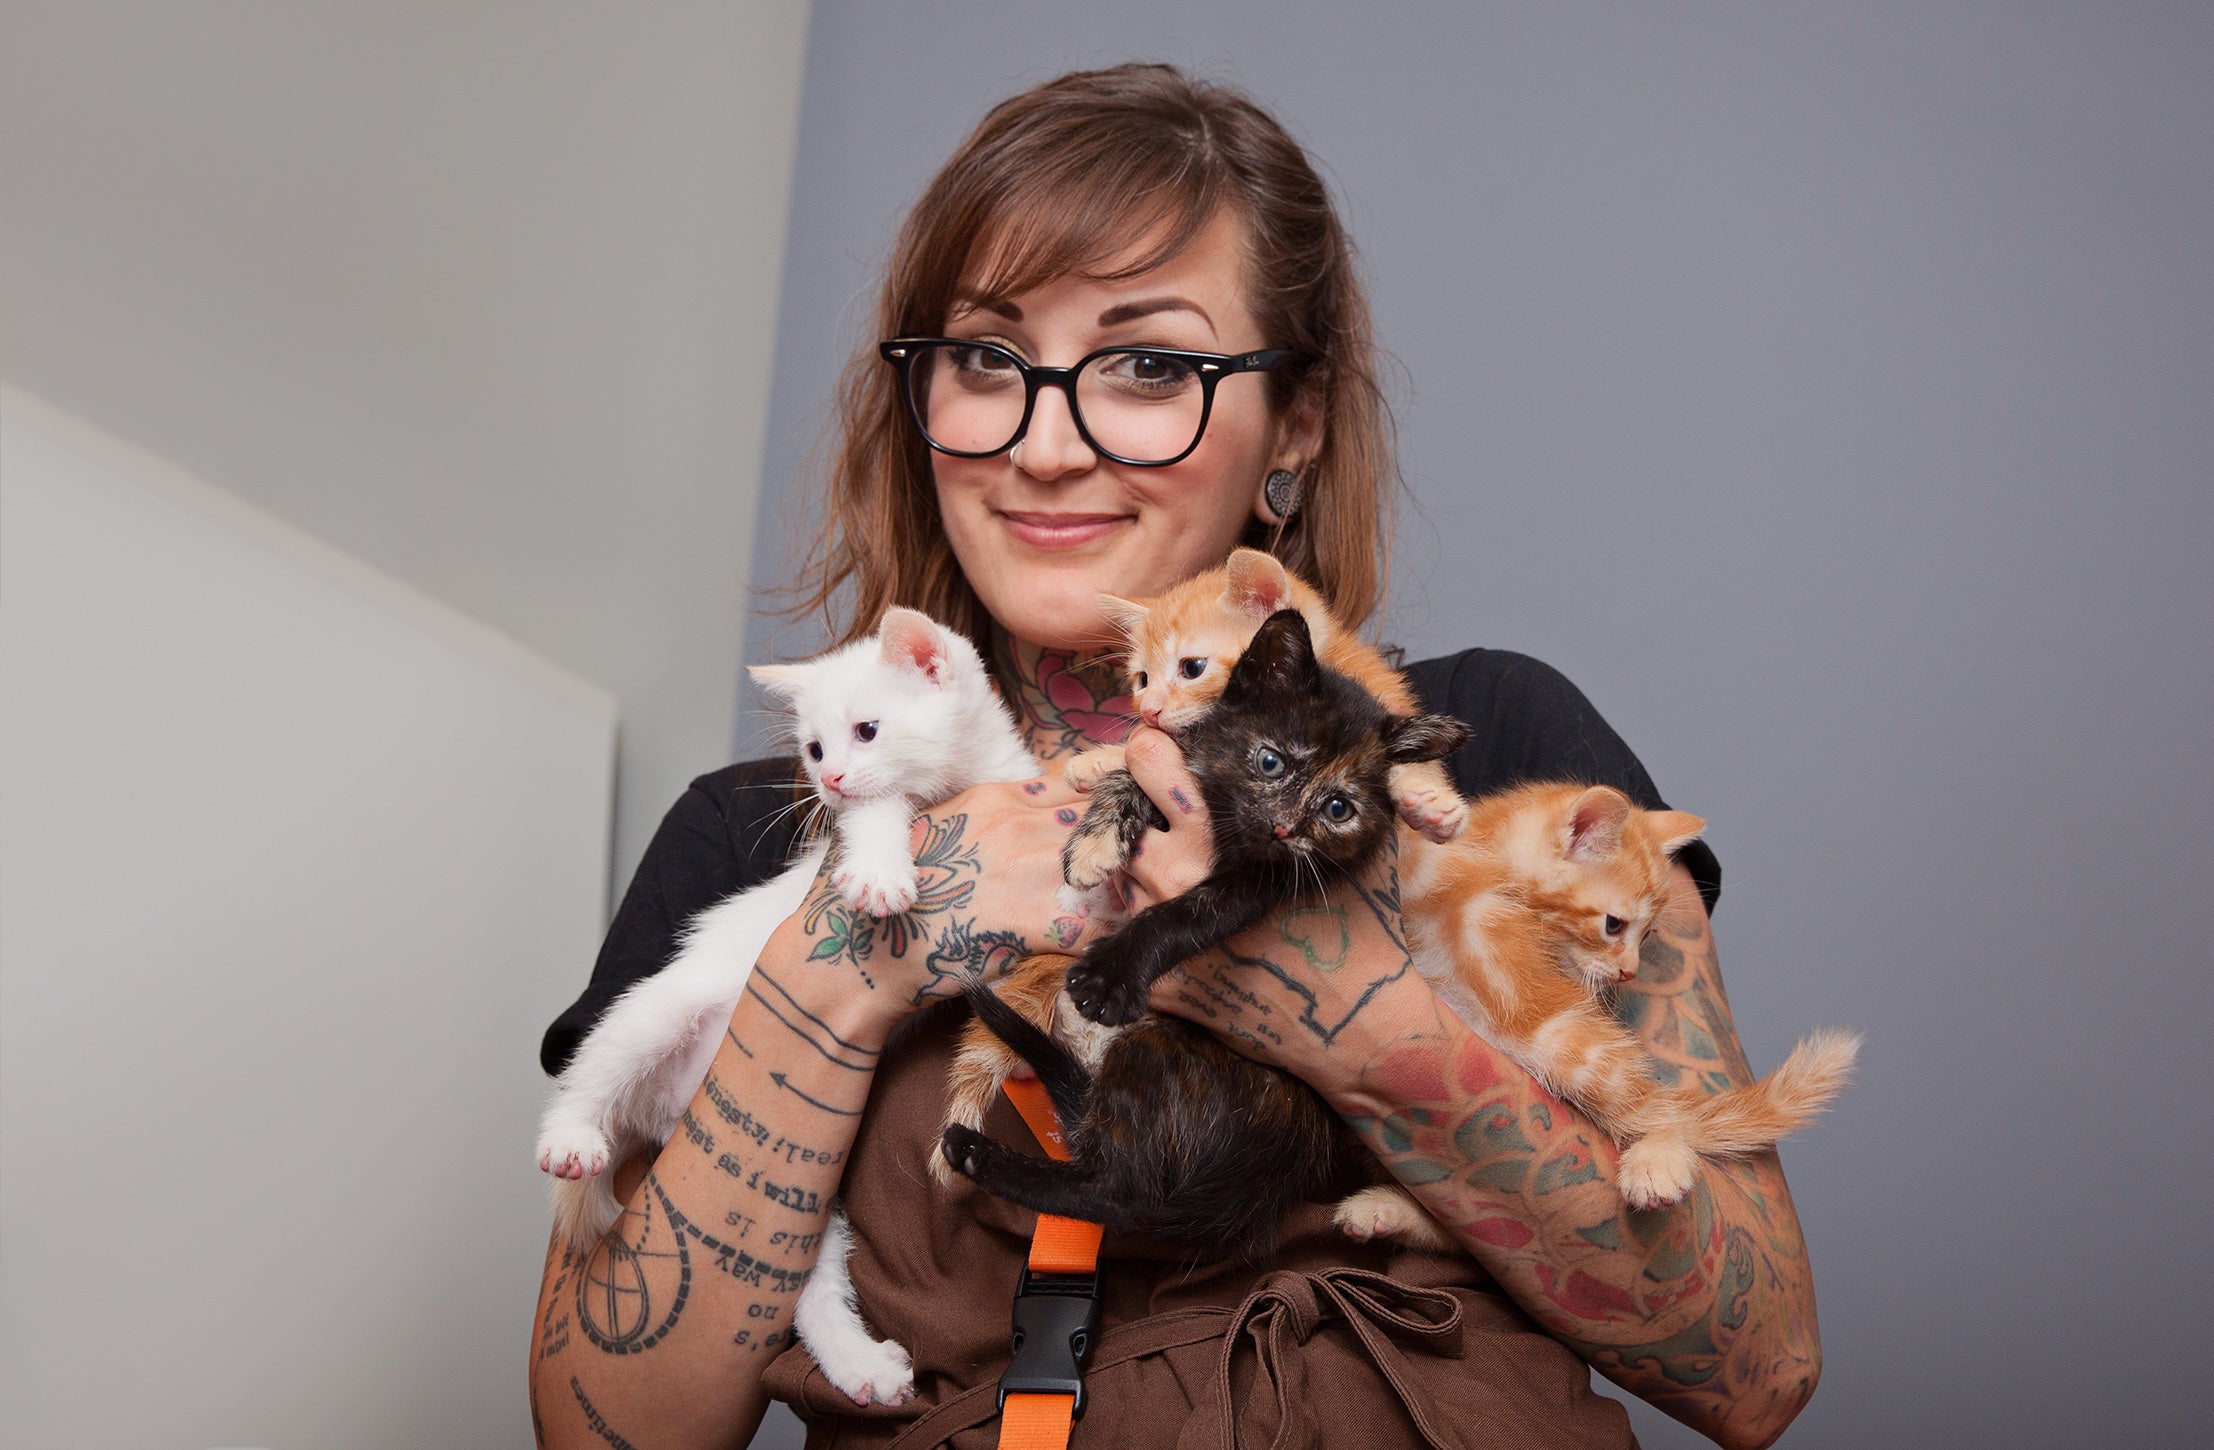 Person holding a litter of kittens